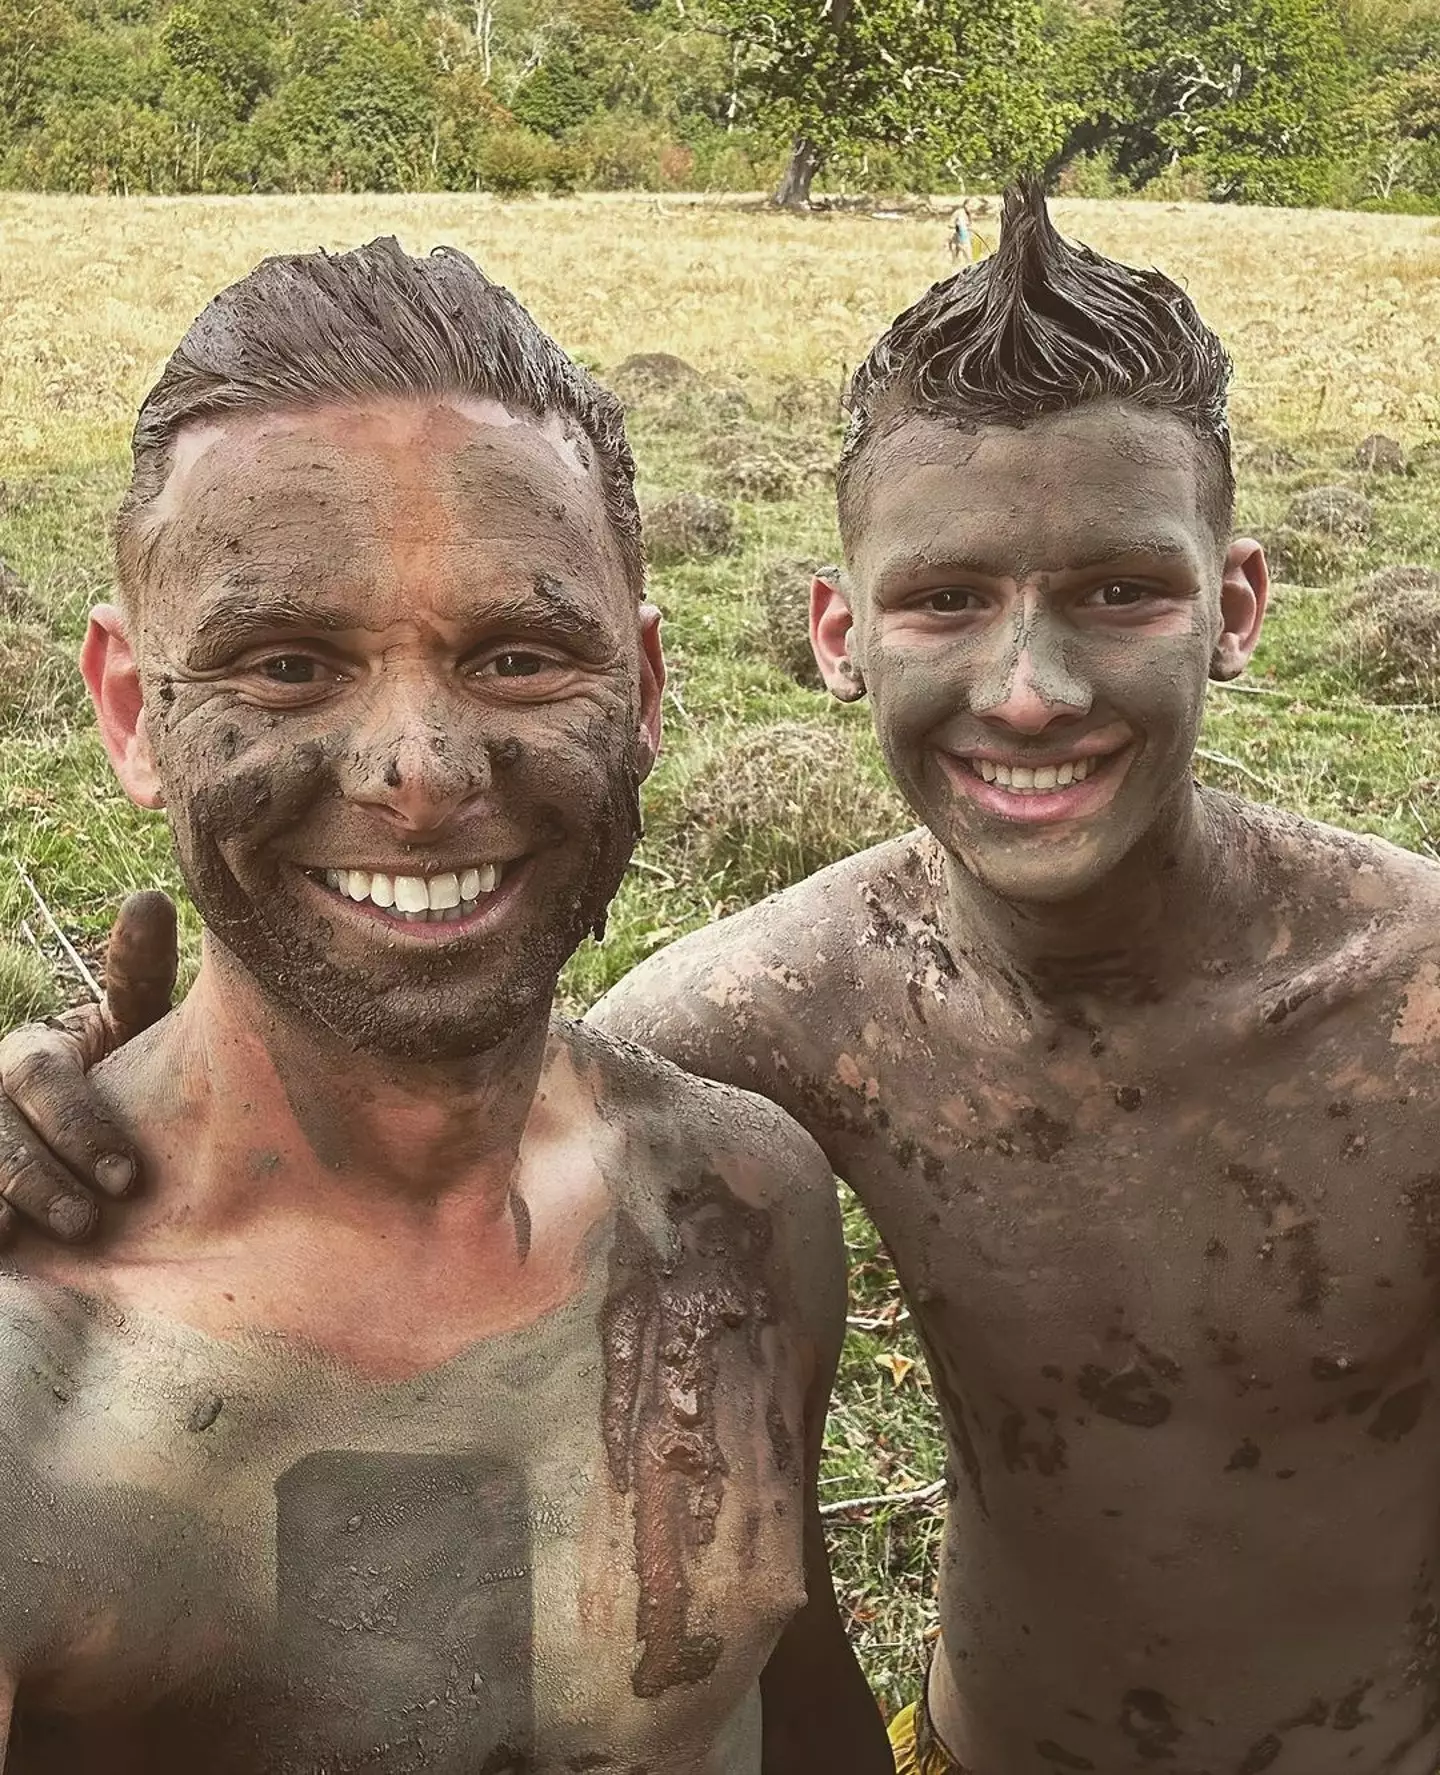 The pair recently enjoyed a mud facial last month.